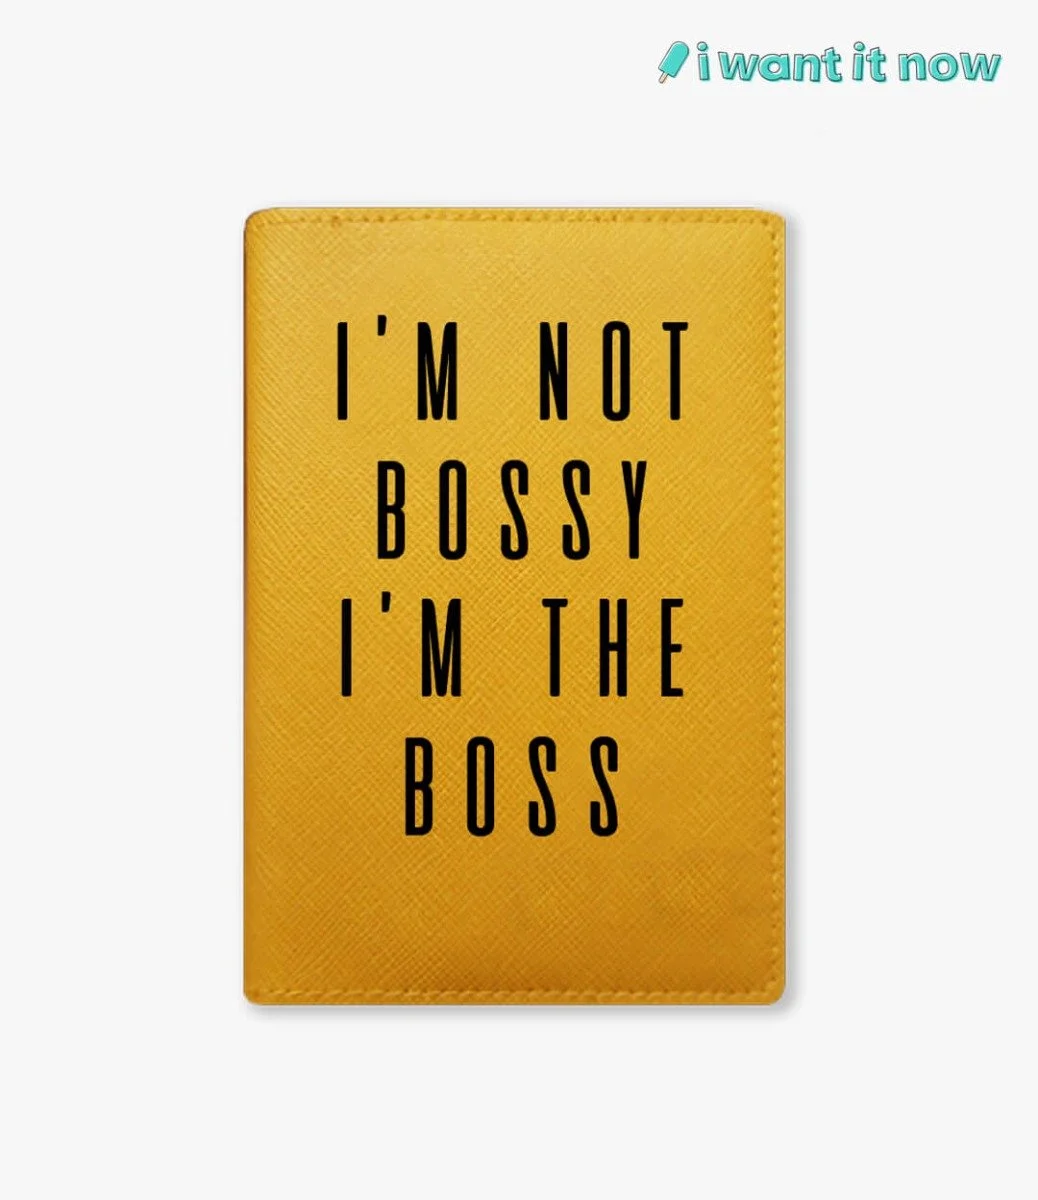 Passport Cover - I'm not bossy, I'm the boss. By I Want It Now